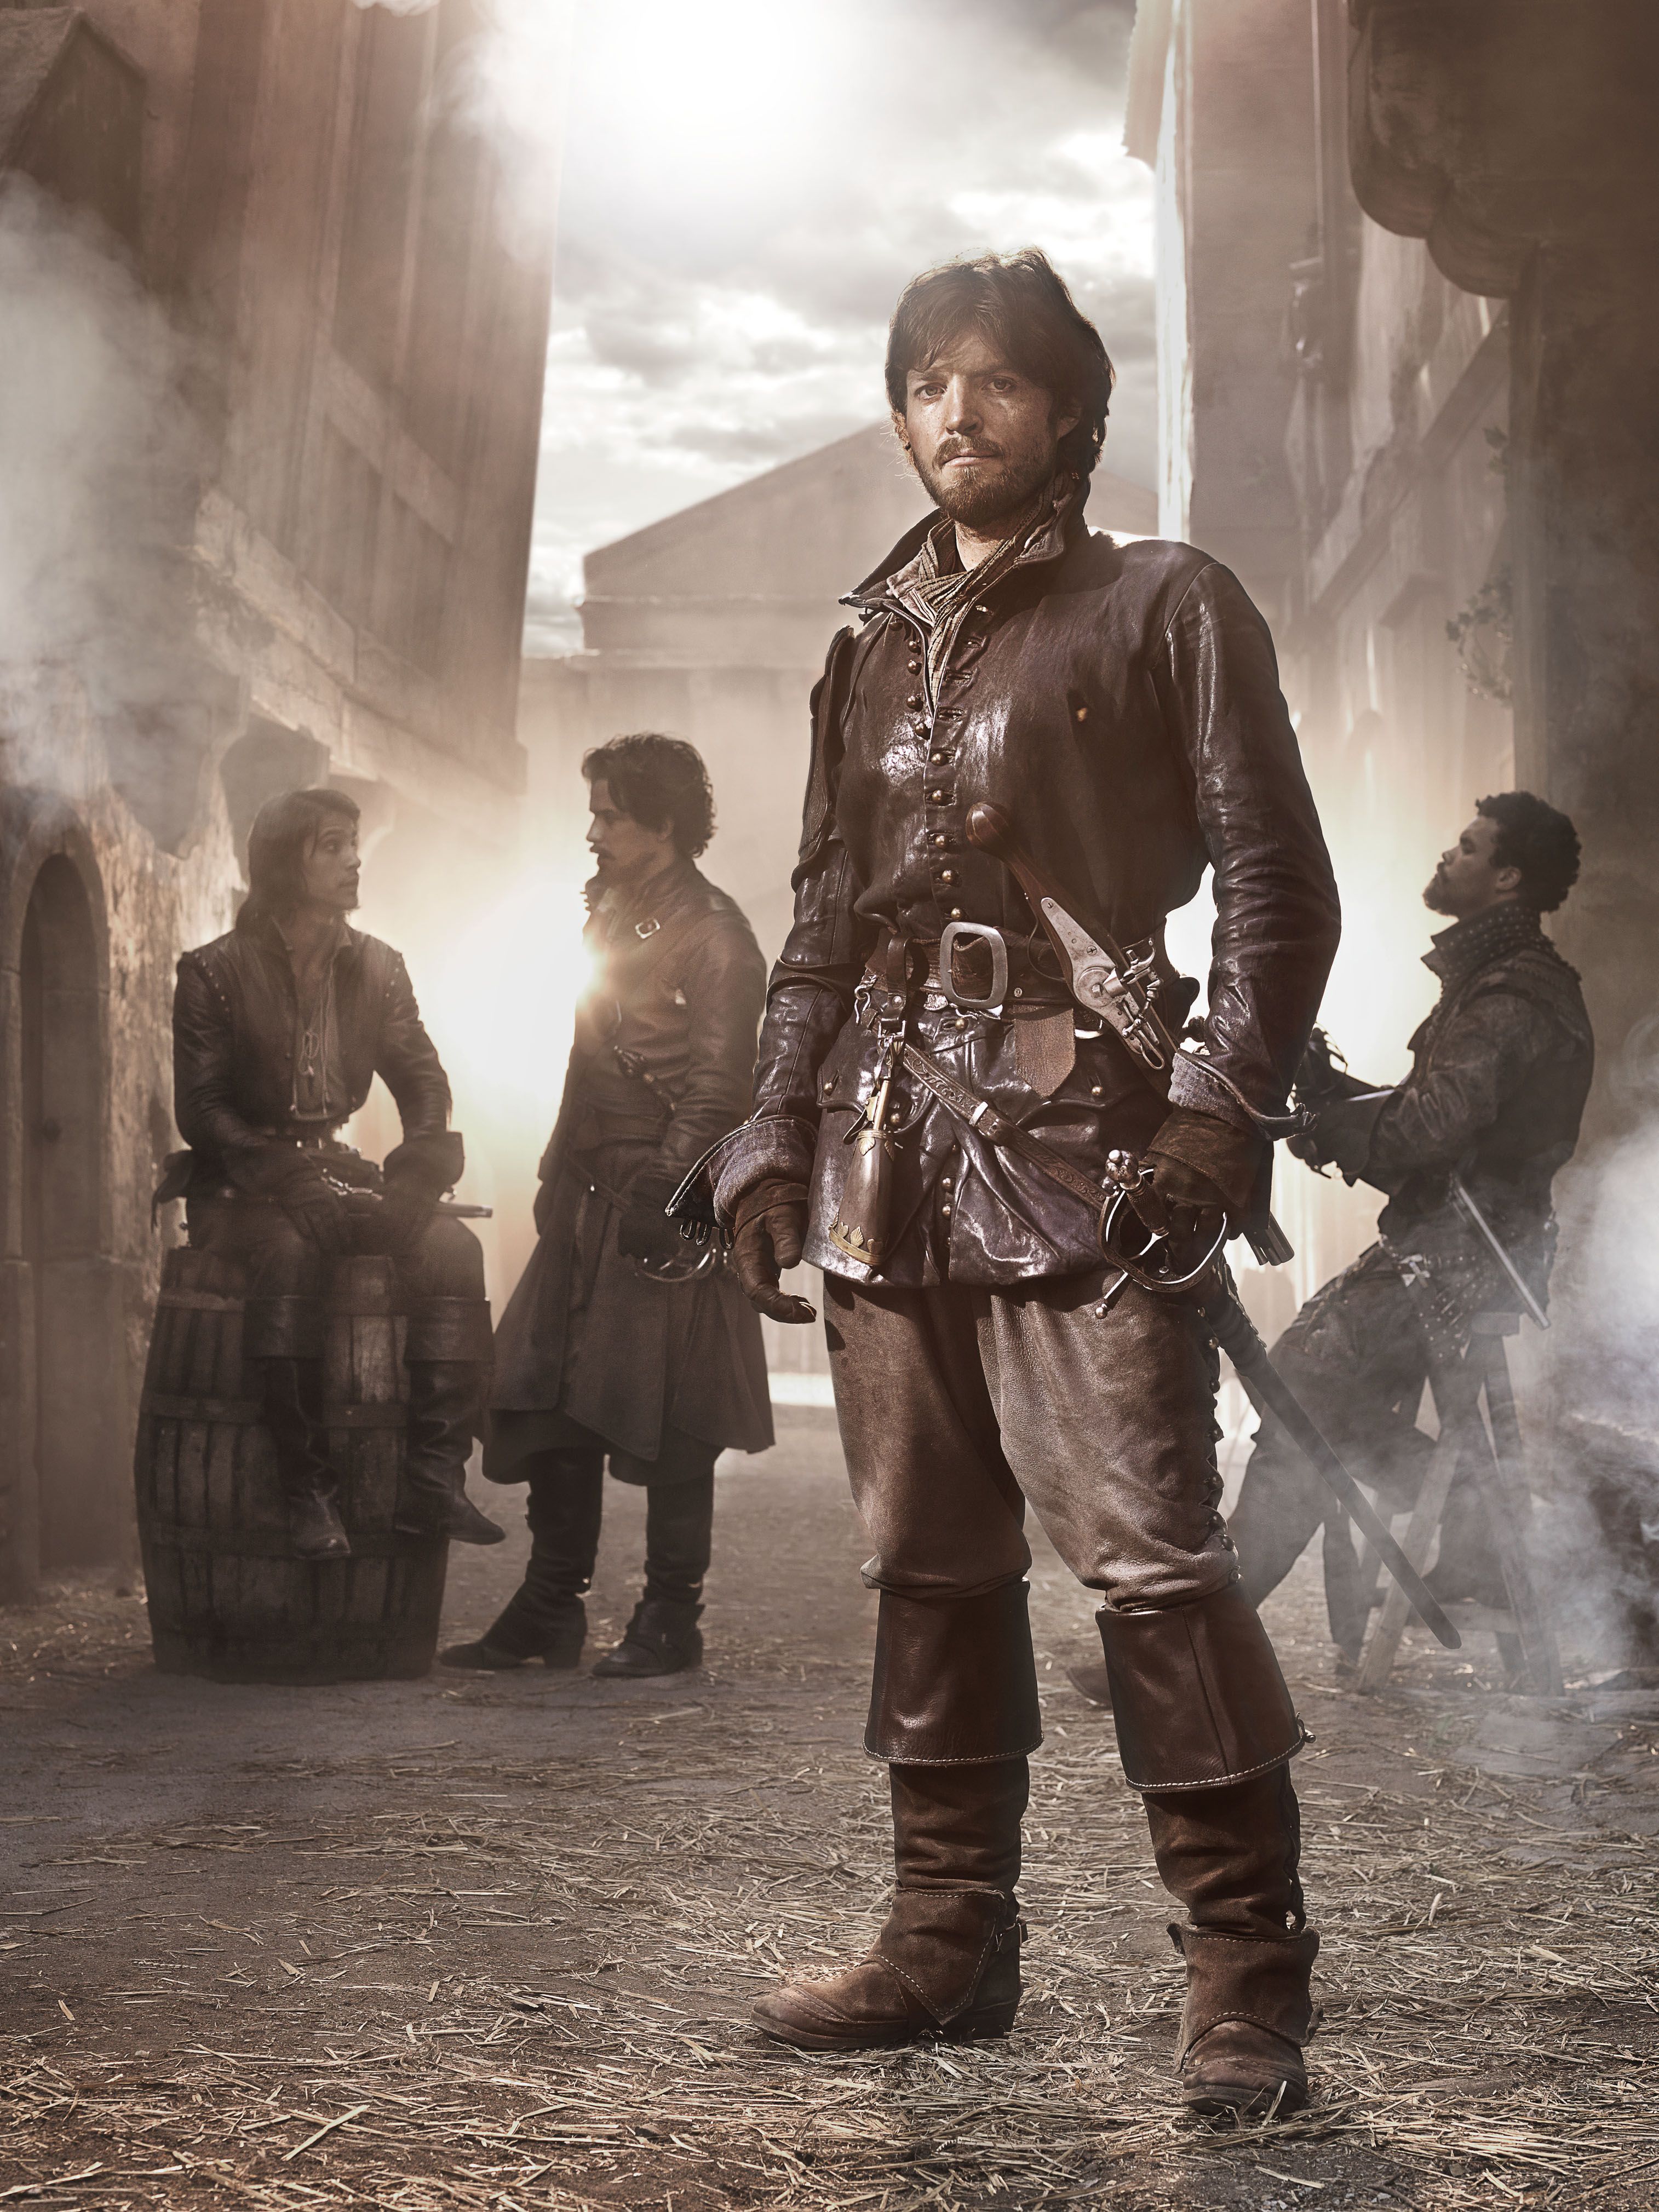 The Musketeers Wallpaper Free .wallpaperaccess.com